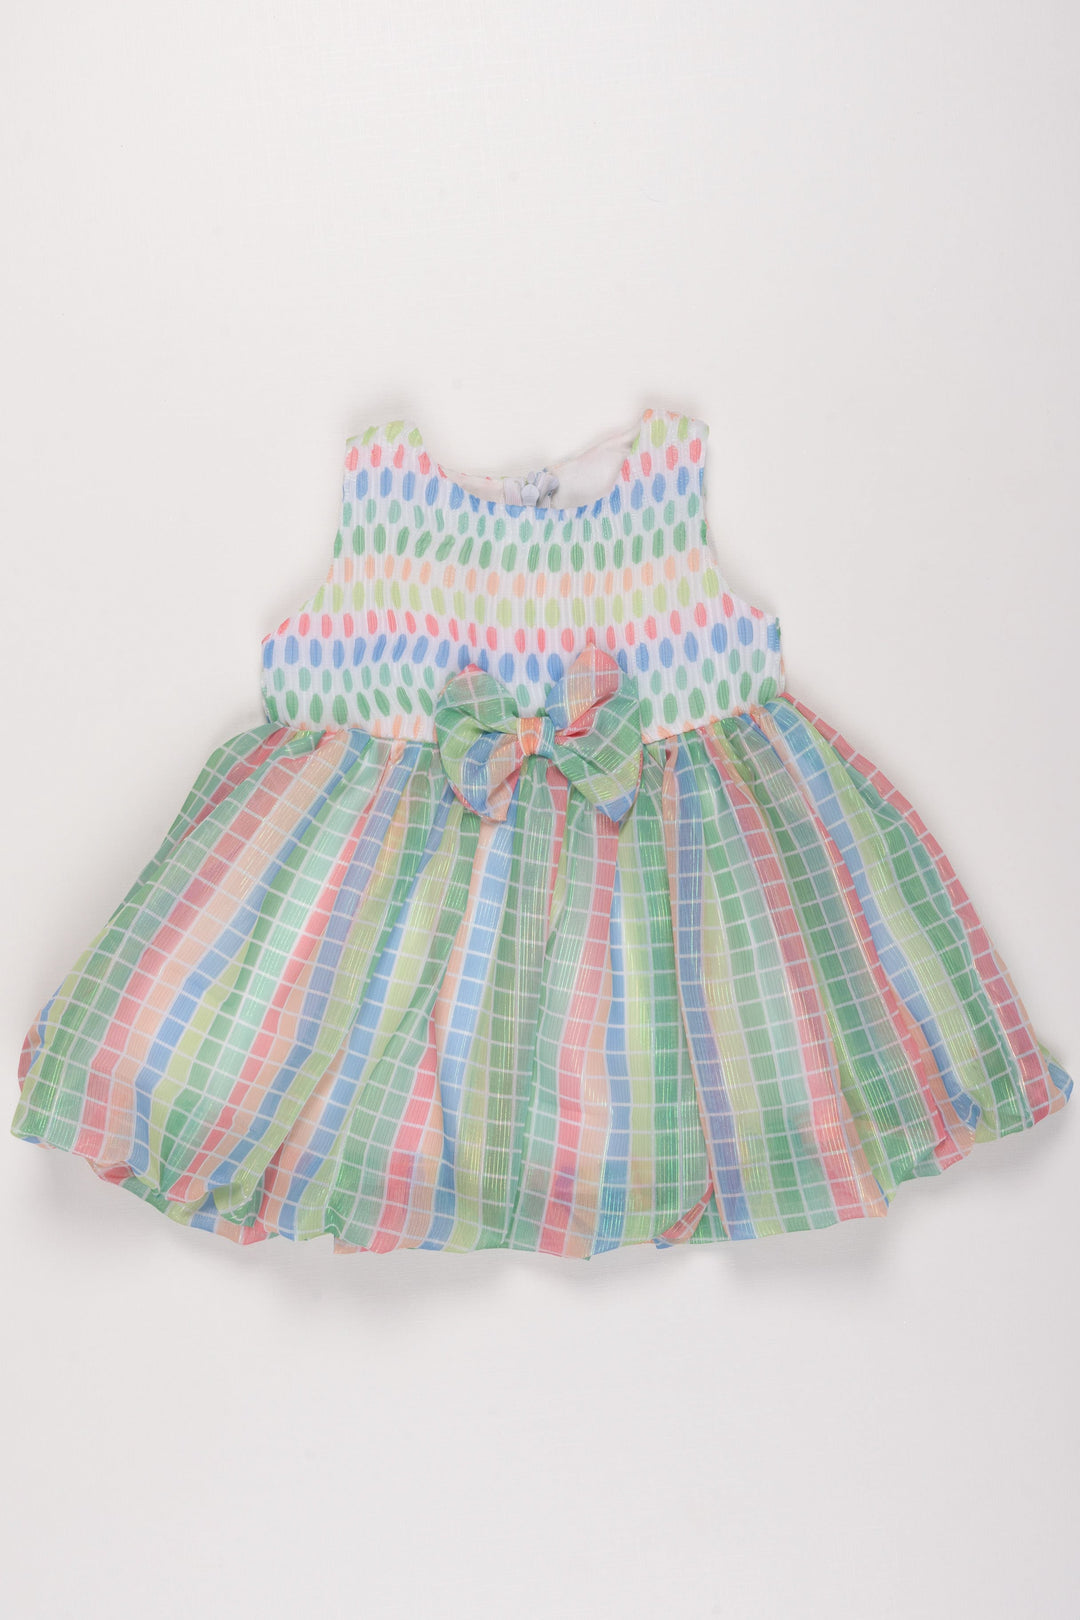 The Nesavu Baby Fancy Frock Infant Girl's Spring Green Plaid Frock with Polka Dot Bodice and Decorative Bow Nesavu 12 (3M) / Green BFJ504B-12 Spring Green Plaid & Polka Dot Frock for Infants | Easter Party Dress | The Nesavu